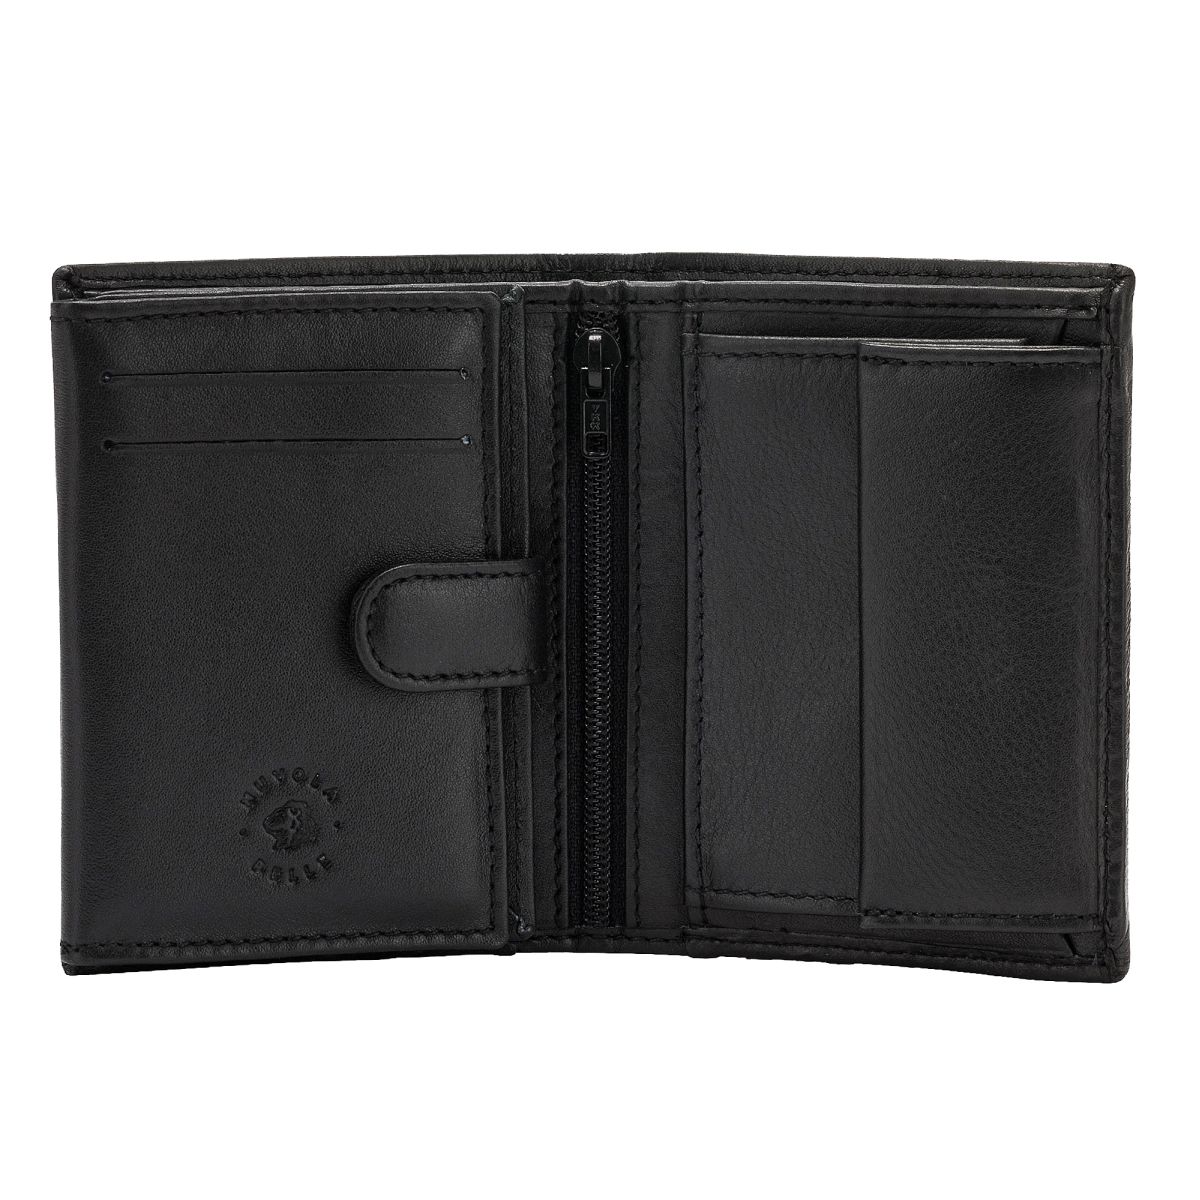 NUVOLA PELLE Small mens wallet with coin pocket - Black